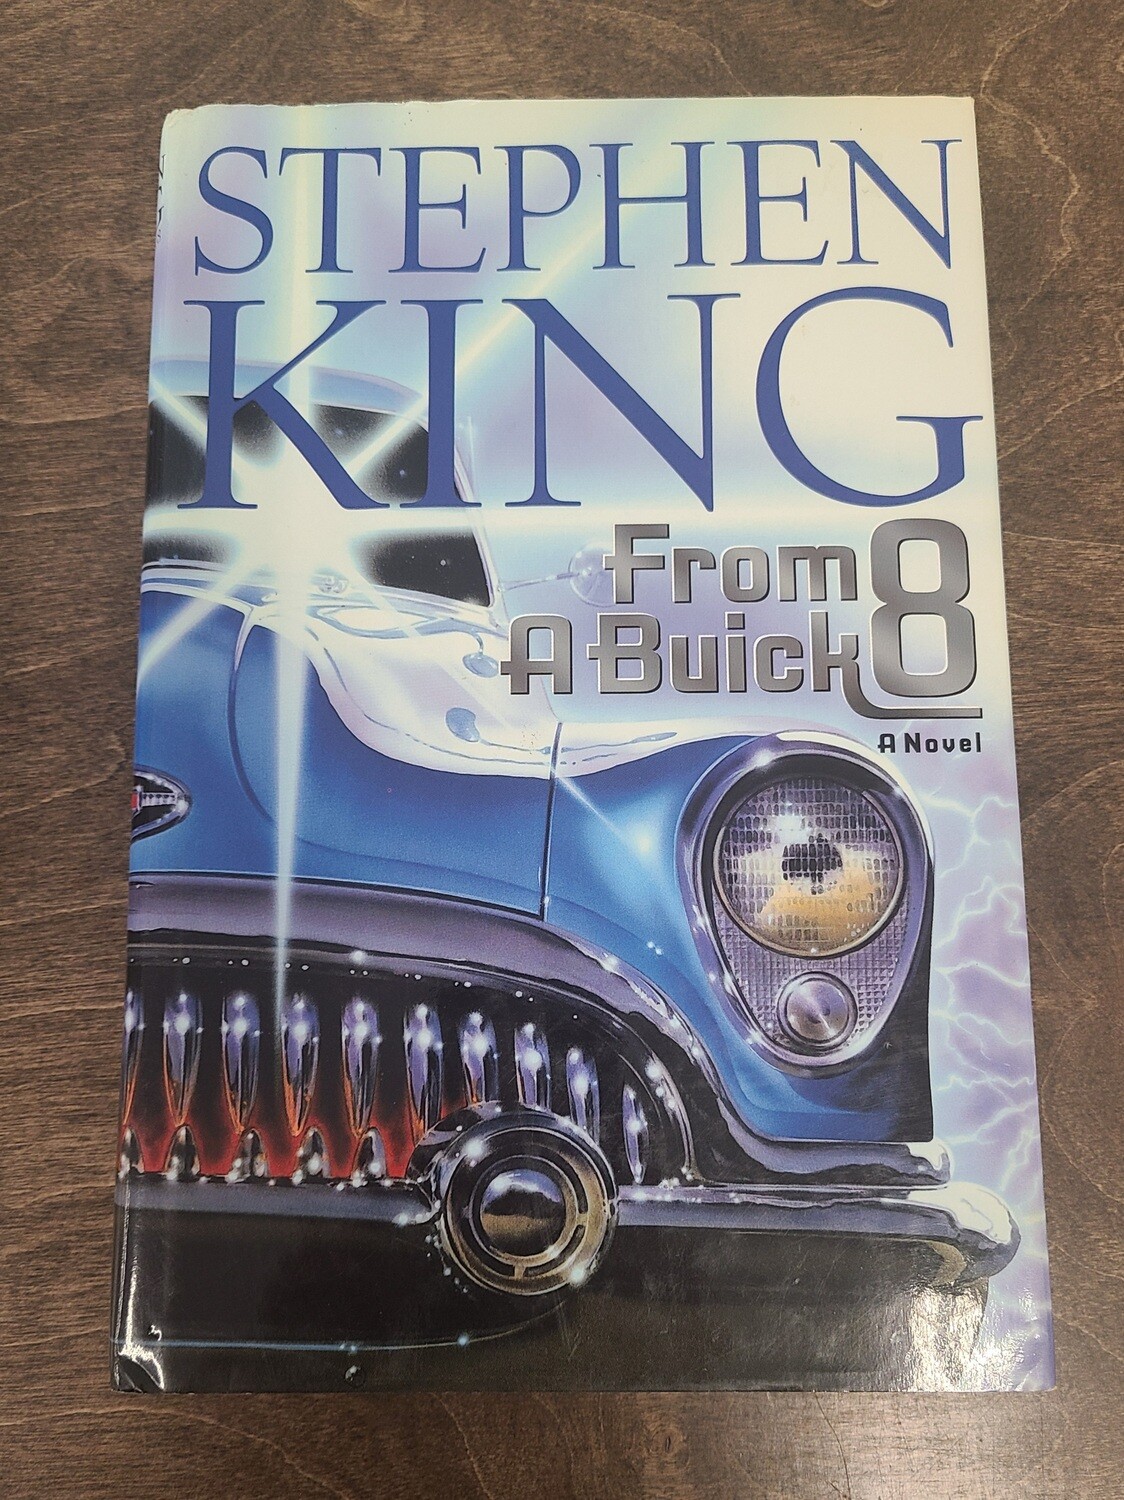 From a Buick 8 by Stephen King